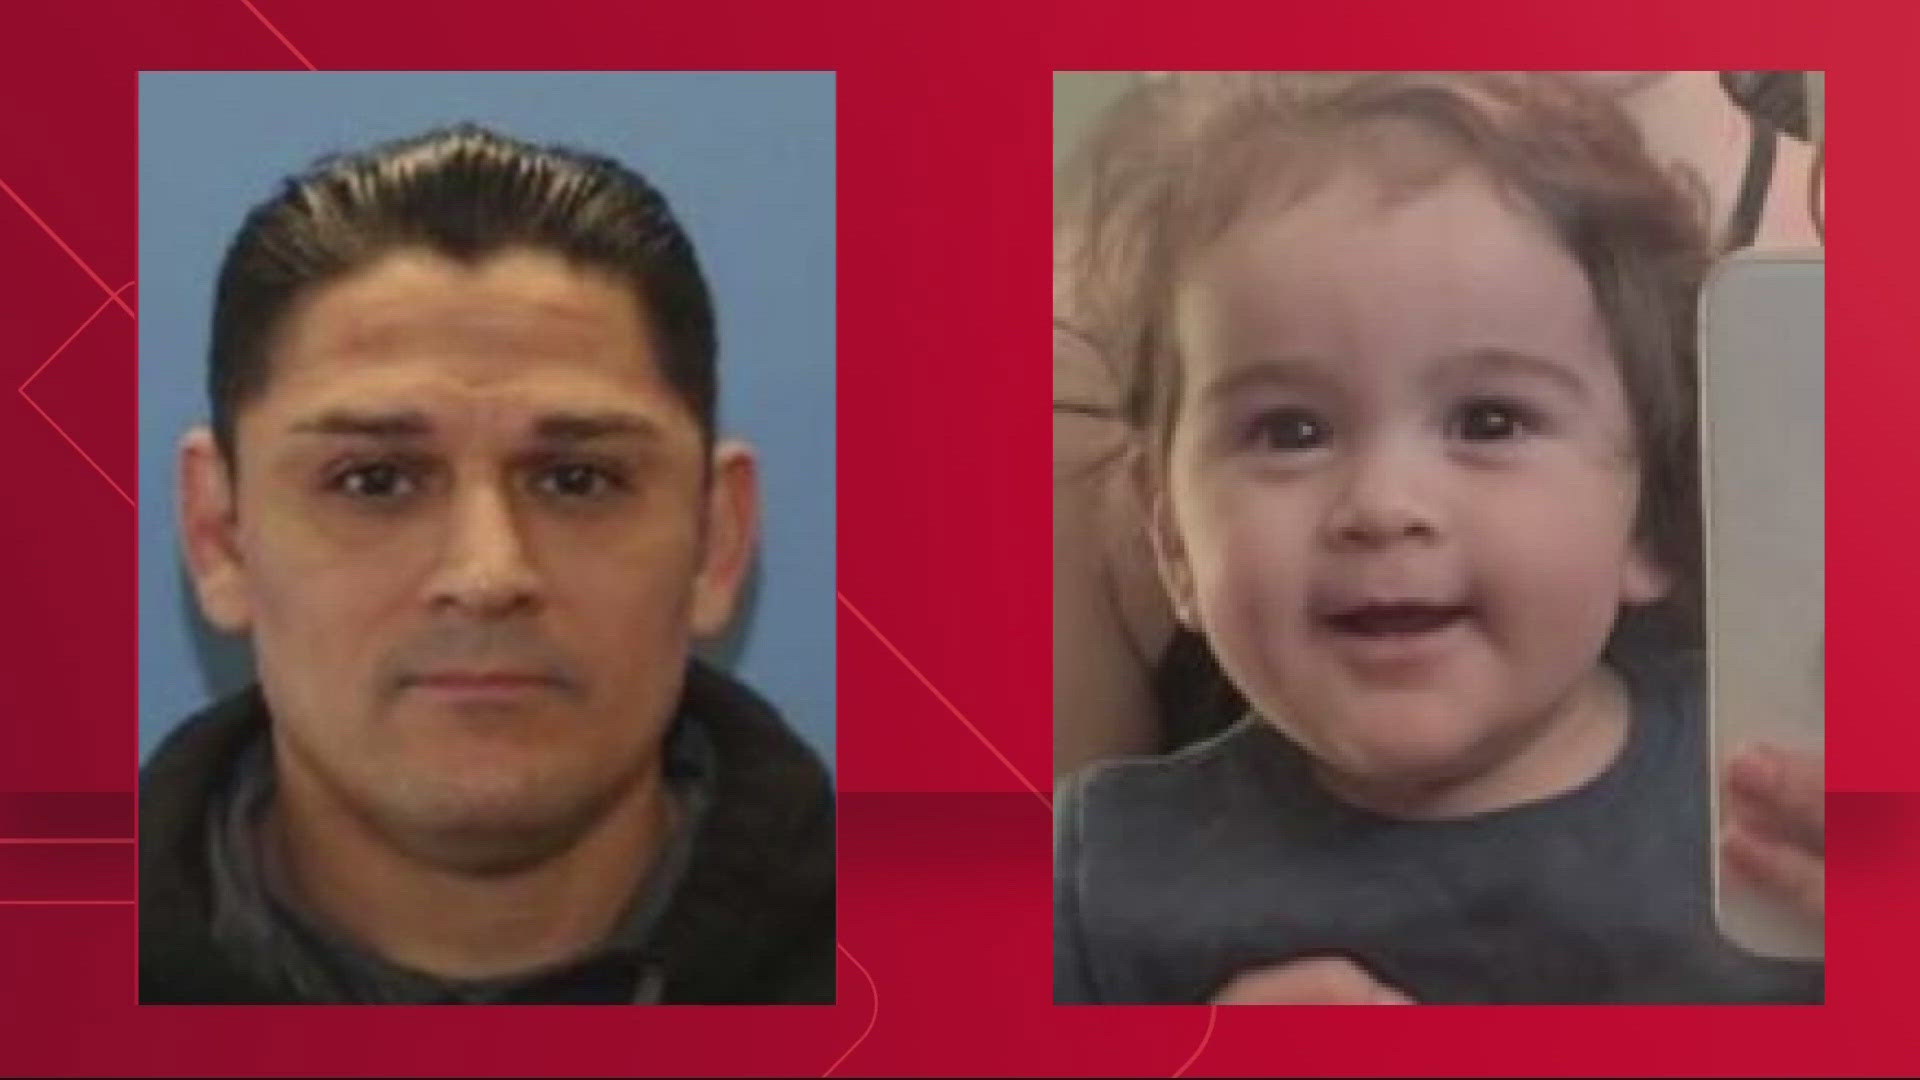 West Richland police received a tip about a possible sighting of Elias Huizar on Hayden Island. He's suspected of a double homicide and kidnapping.